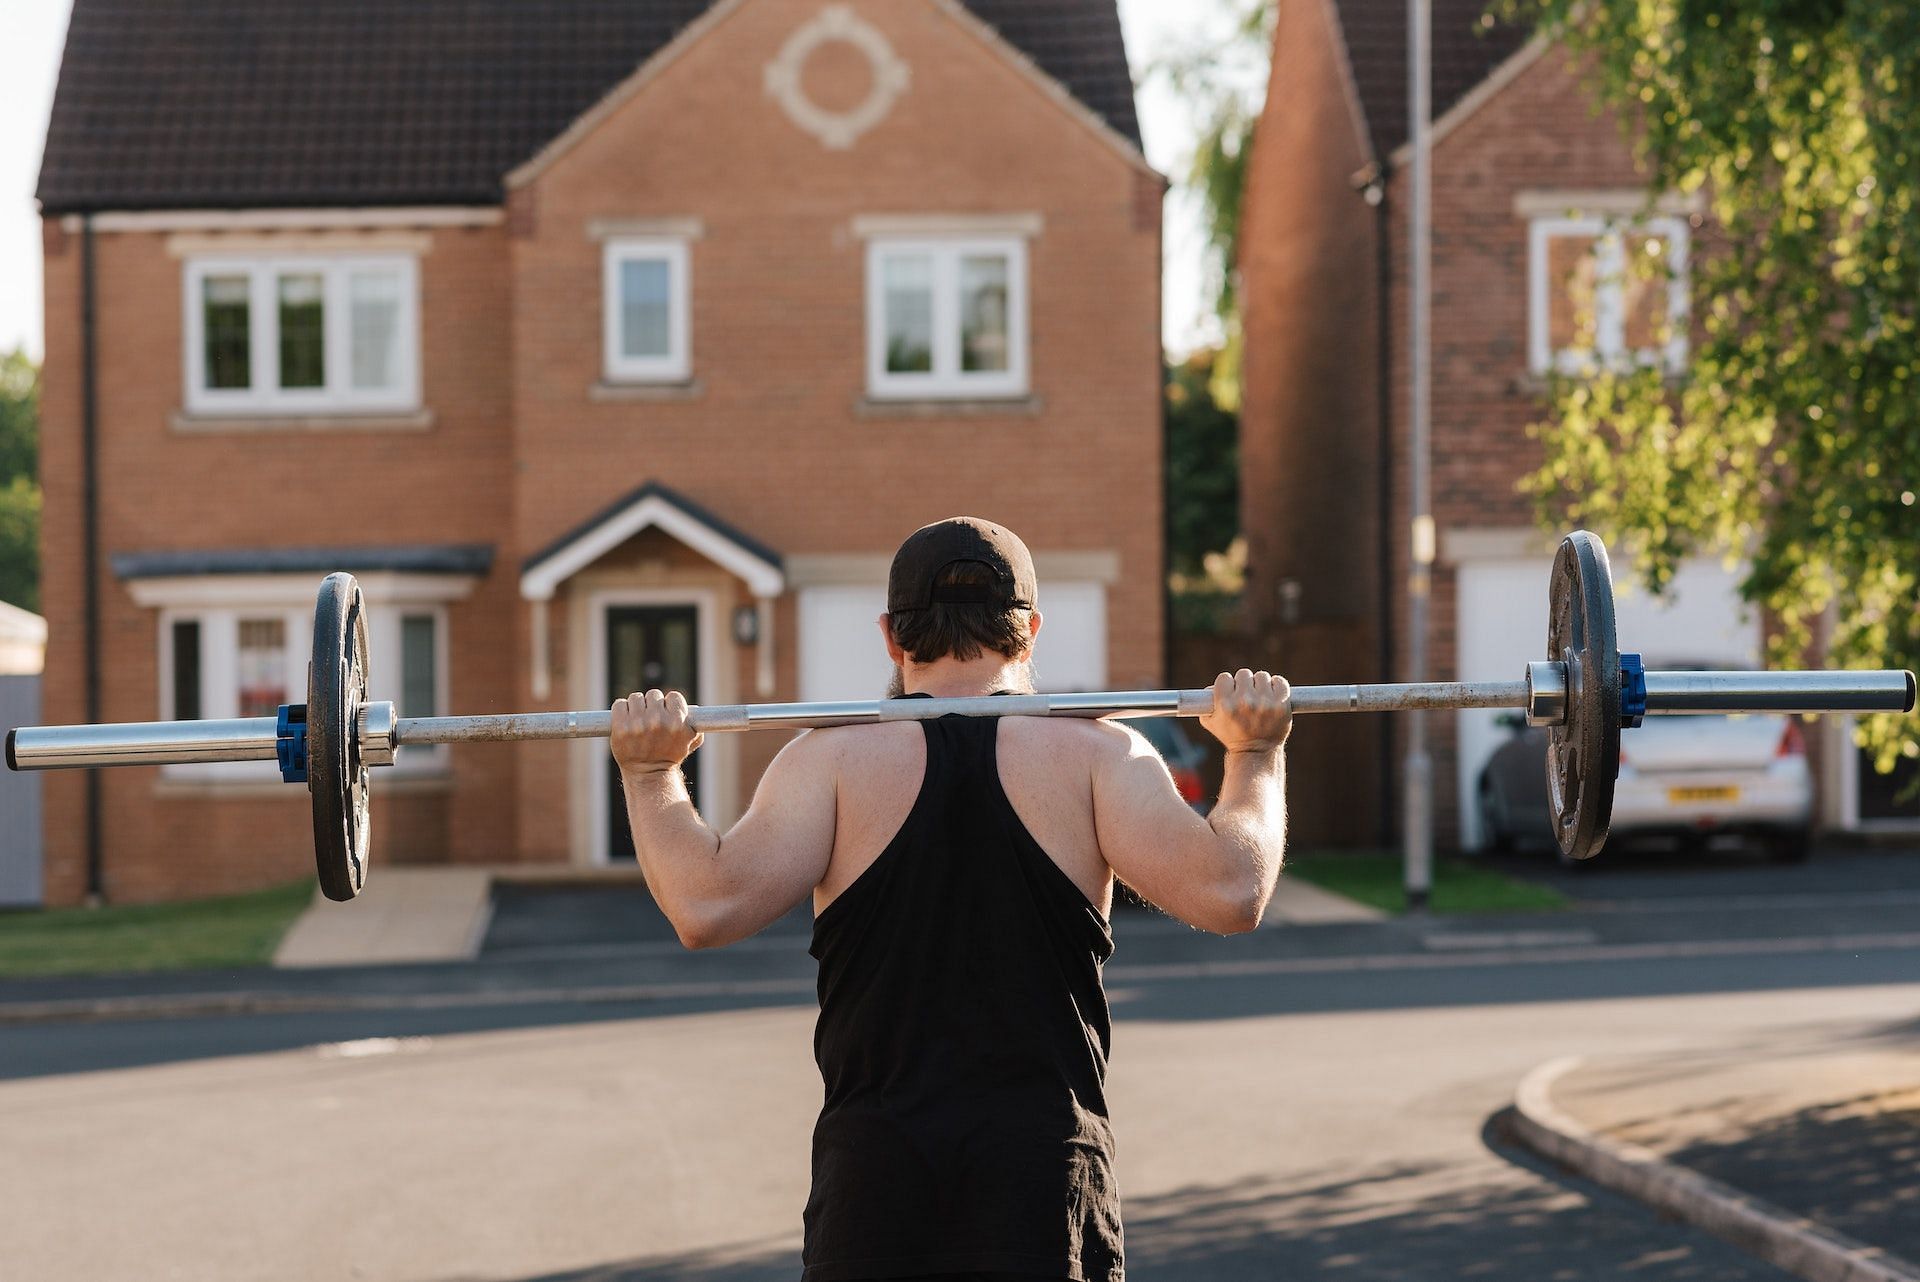 The high bar squat is an effective barbell squat variation. (Photo via Pexels/Anete Lusina)